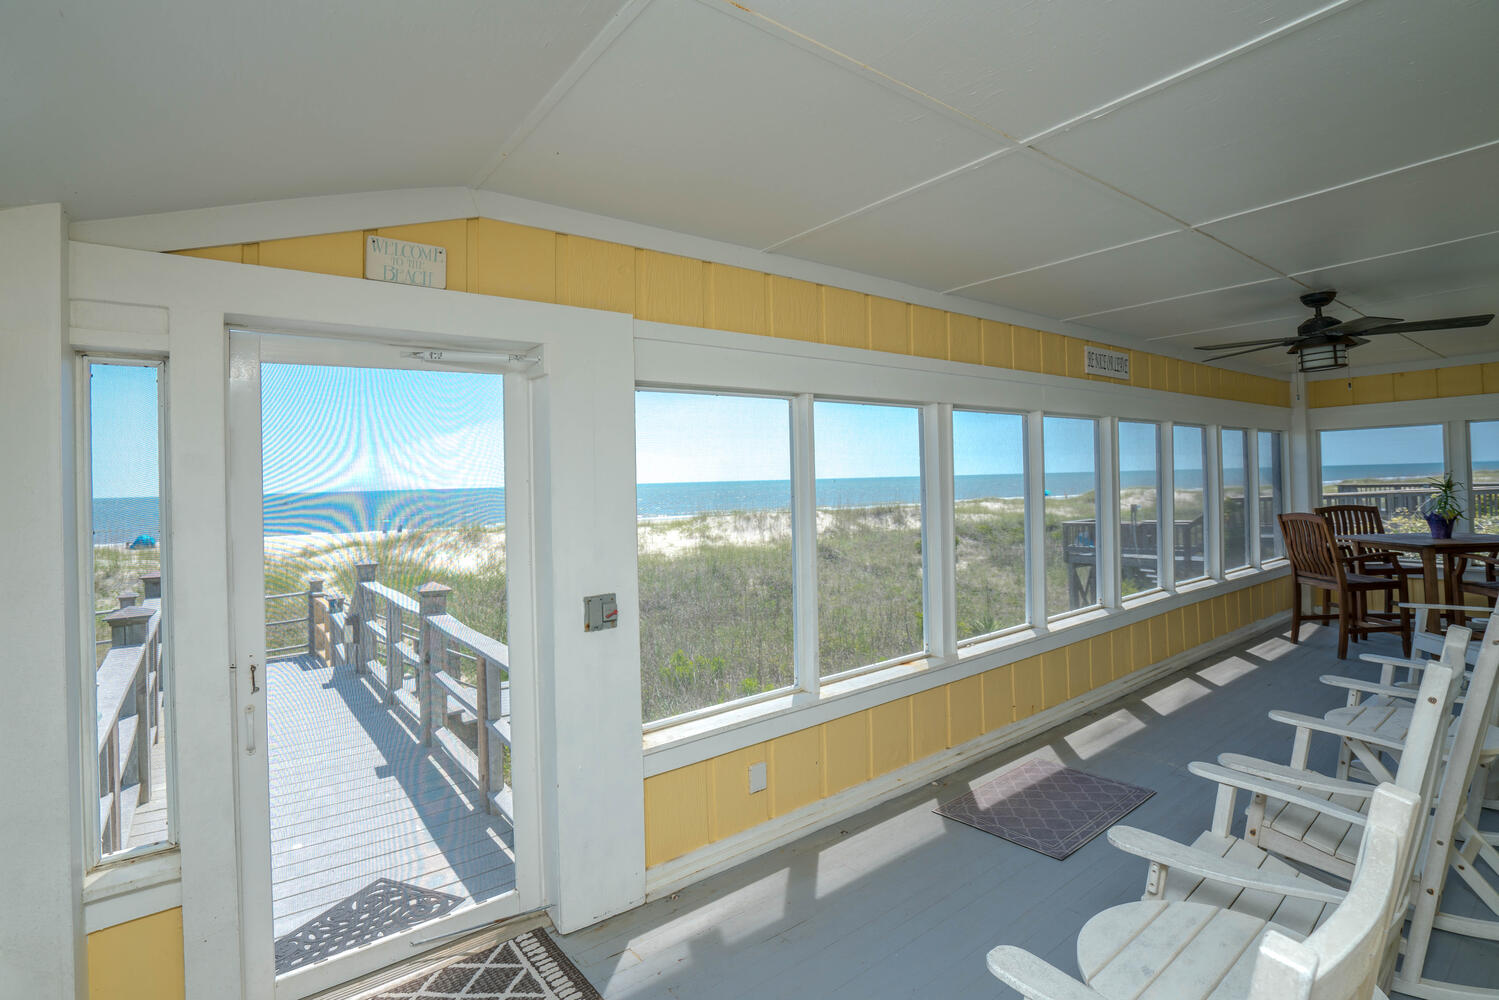 Property Image 1 - Pet friendly private ocean front cottage nestled in peaceful Caswell Beach.  Running Down A Dream